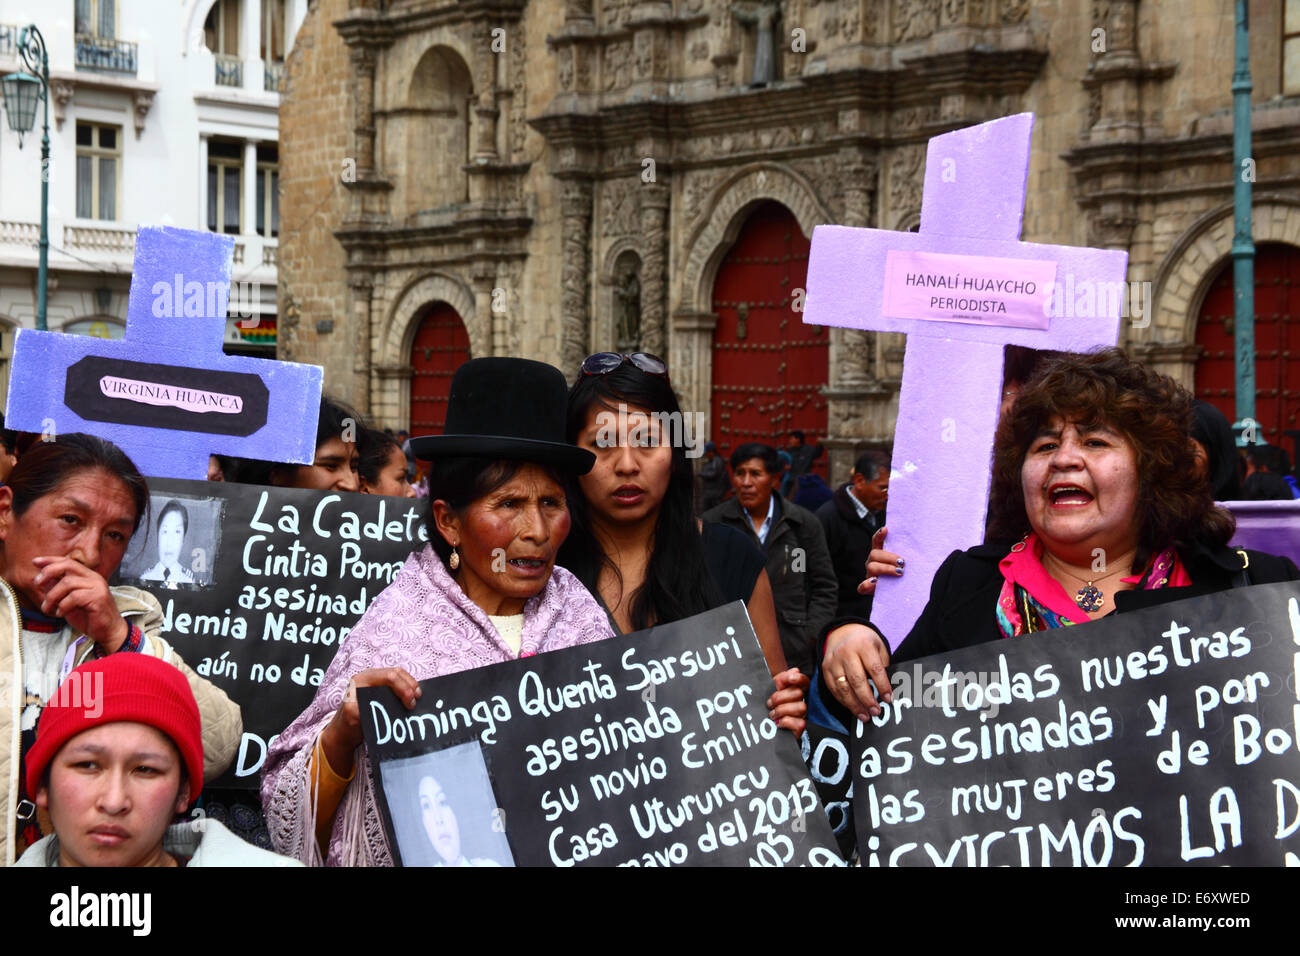 La Paz, Bolivia, 1st September 2014. Womens Rights Activists and supporters carry crosses with the names of victims during a rally to protest against violence against women. The march was also to repudiate recent statements made by several candidates during the current election campaign that appear to minimise the problem and discriminate against women. According to a WHO report in January 2013 Bolivia is the country with the highest rate of violence against women in Latin America, there have been 453 cases of femicide since 2006 during the current government. Credit:  James Brunker/Alamy Live Stock Photo